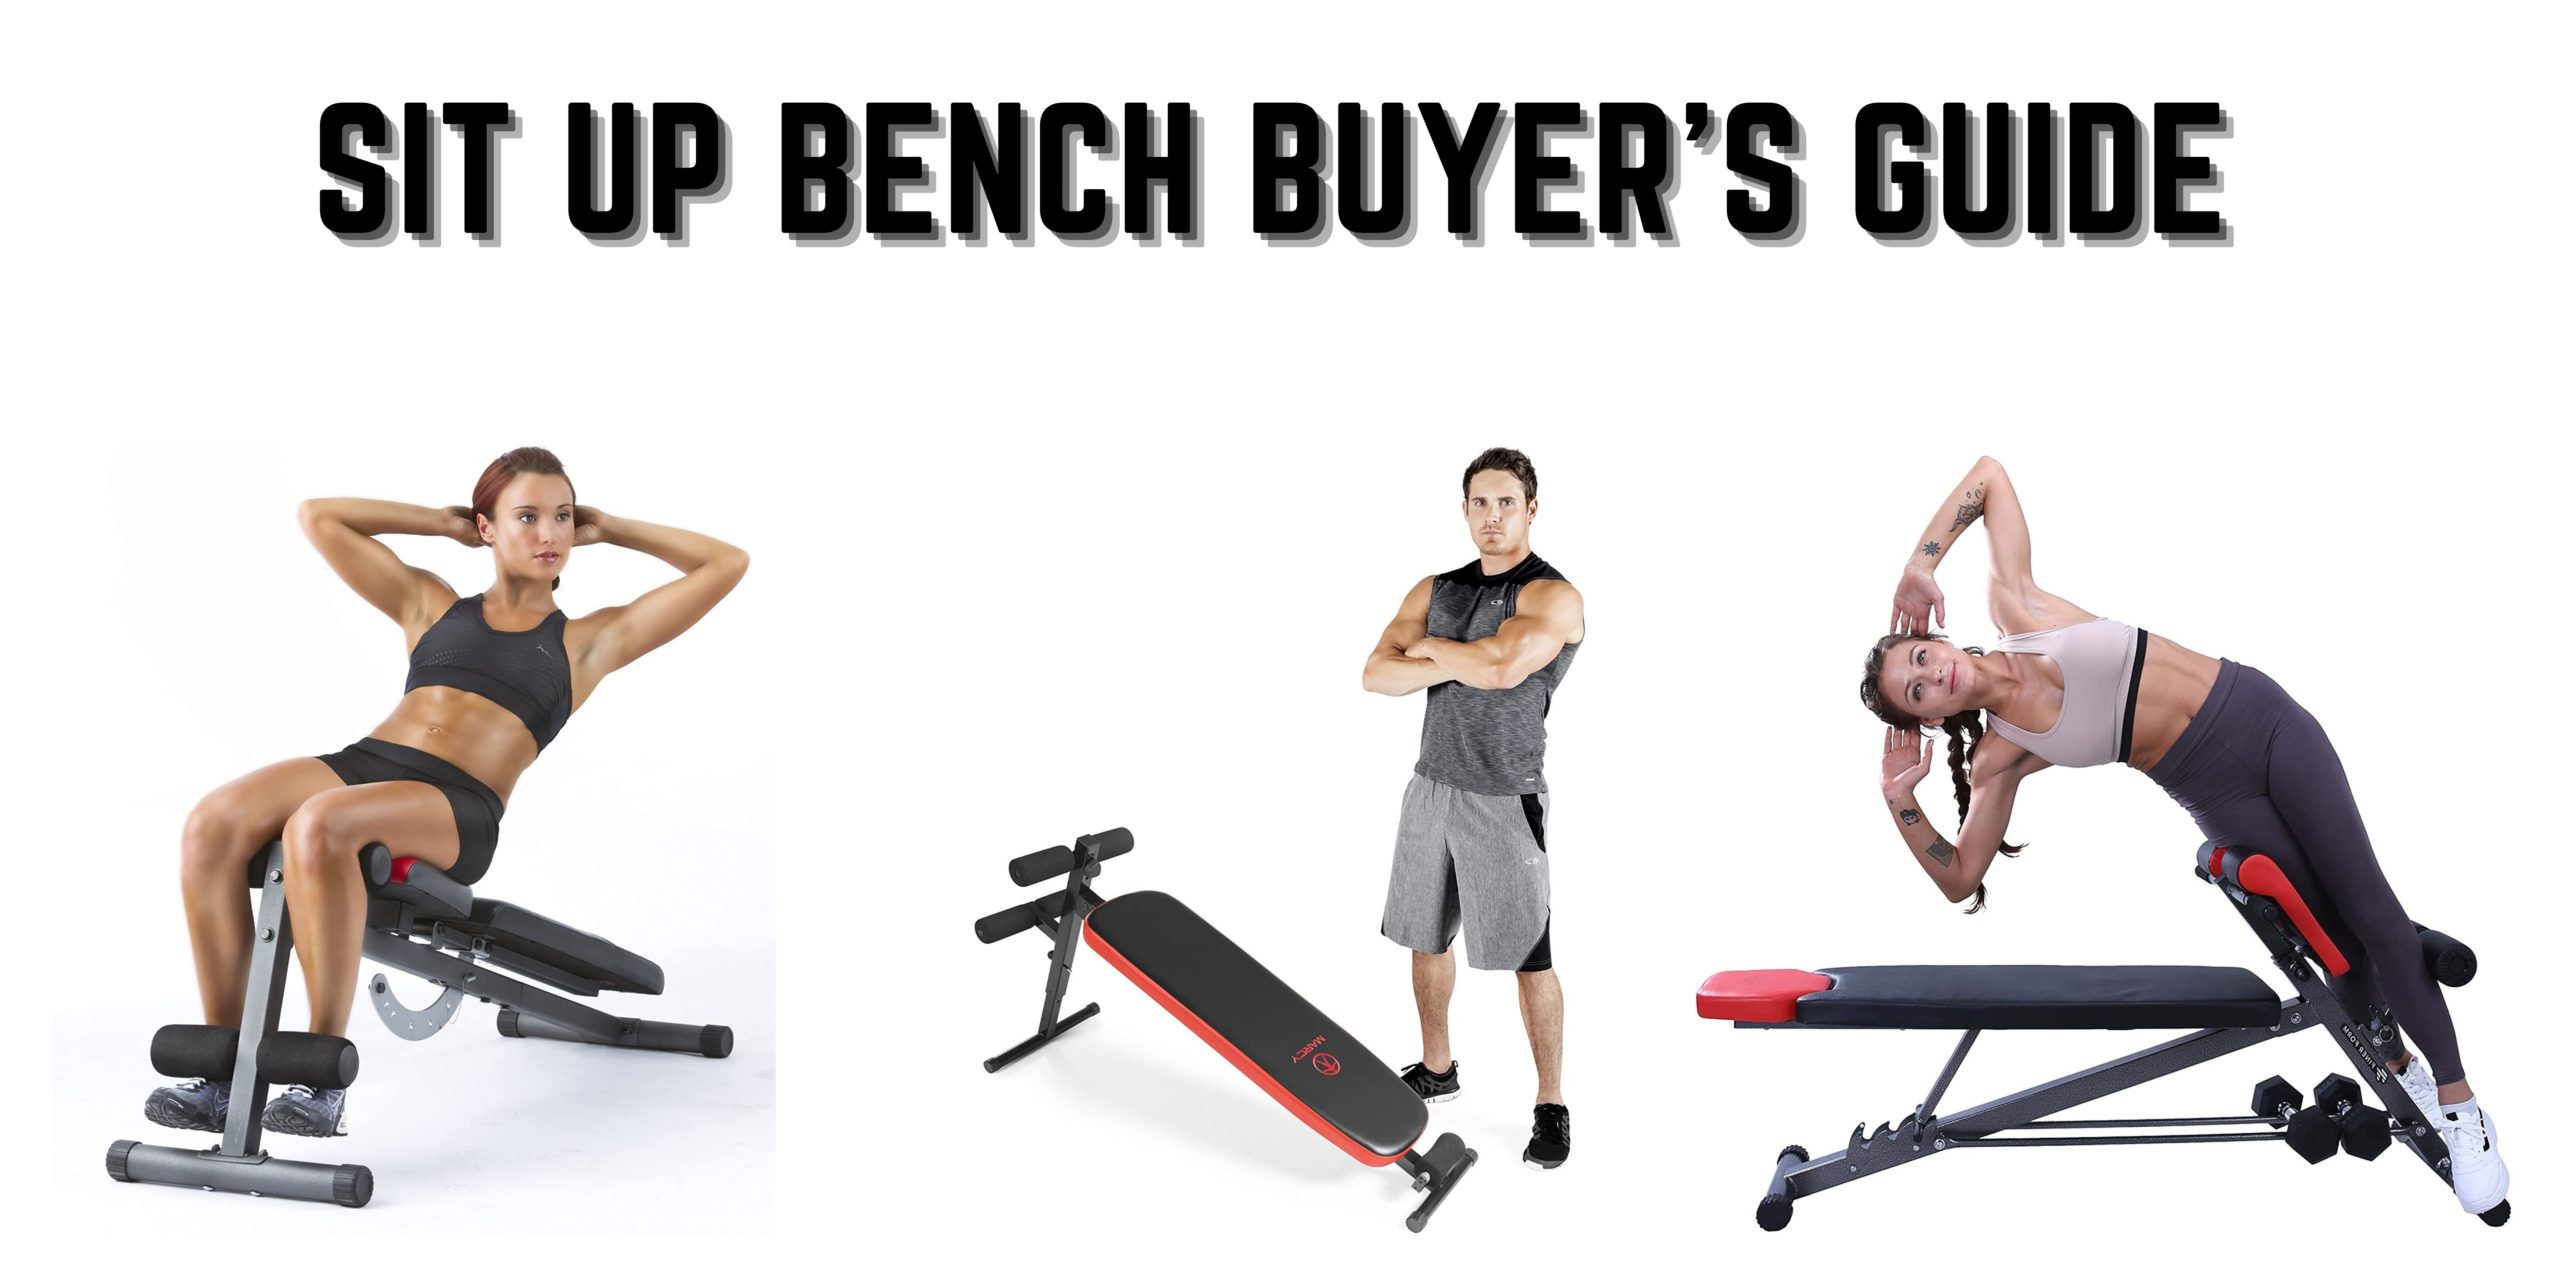 Sit Up Bench Buyers Guide scaled